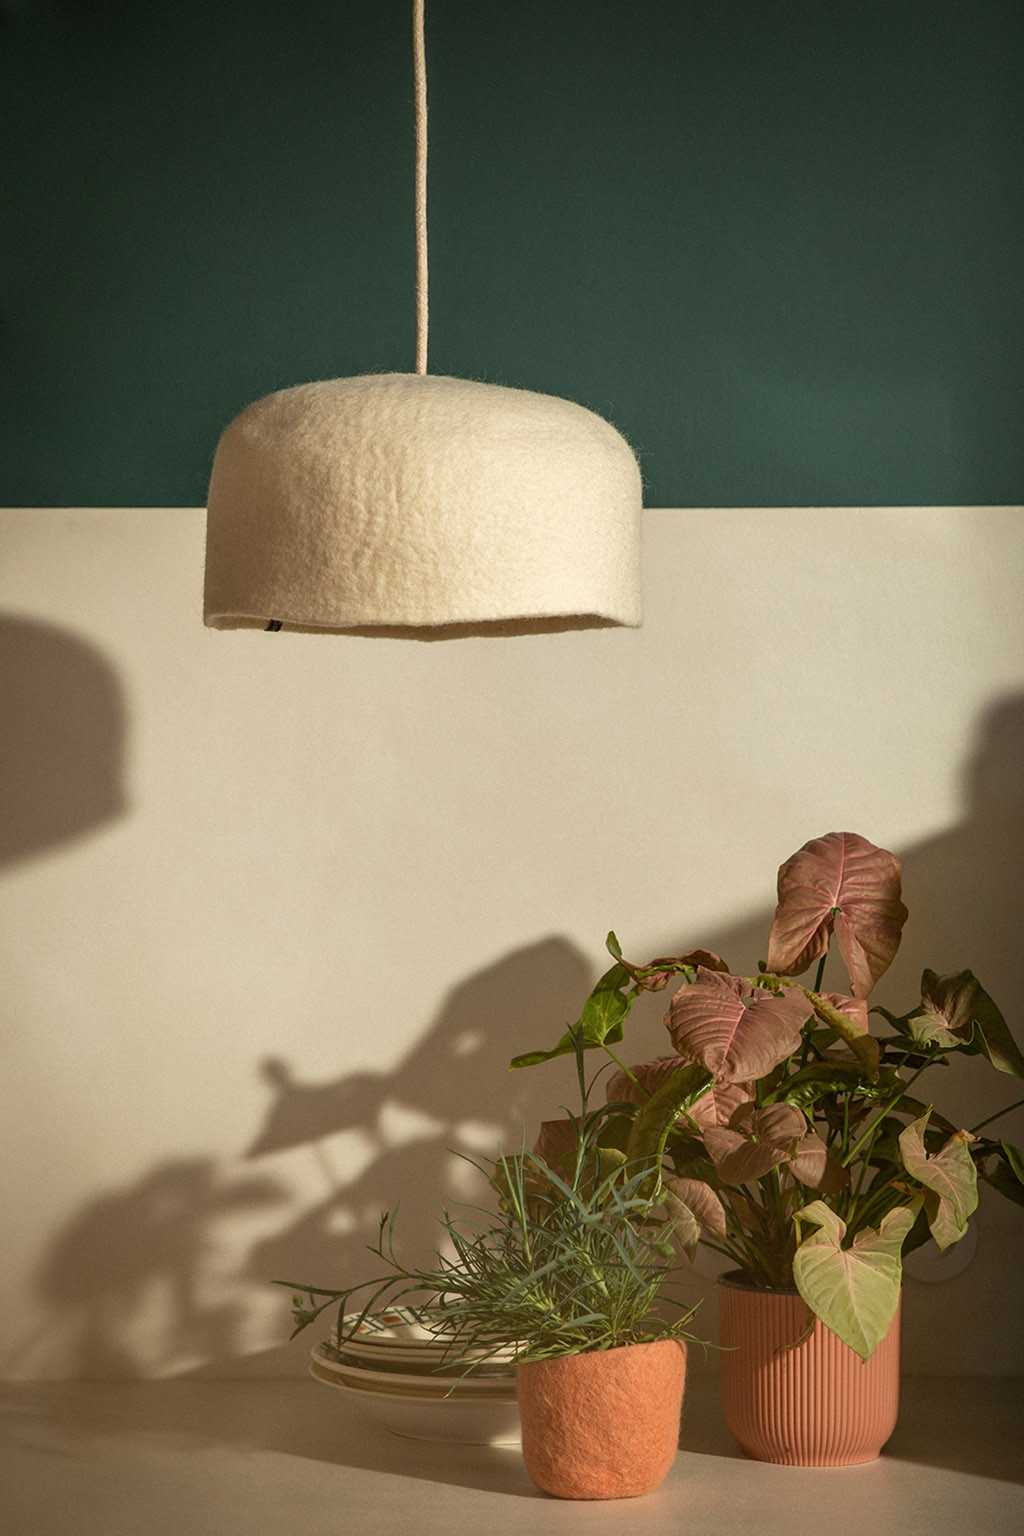 Large yurt lampshade in felt for a soft decoration